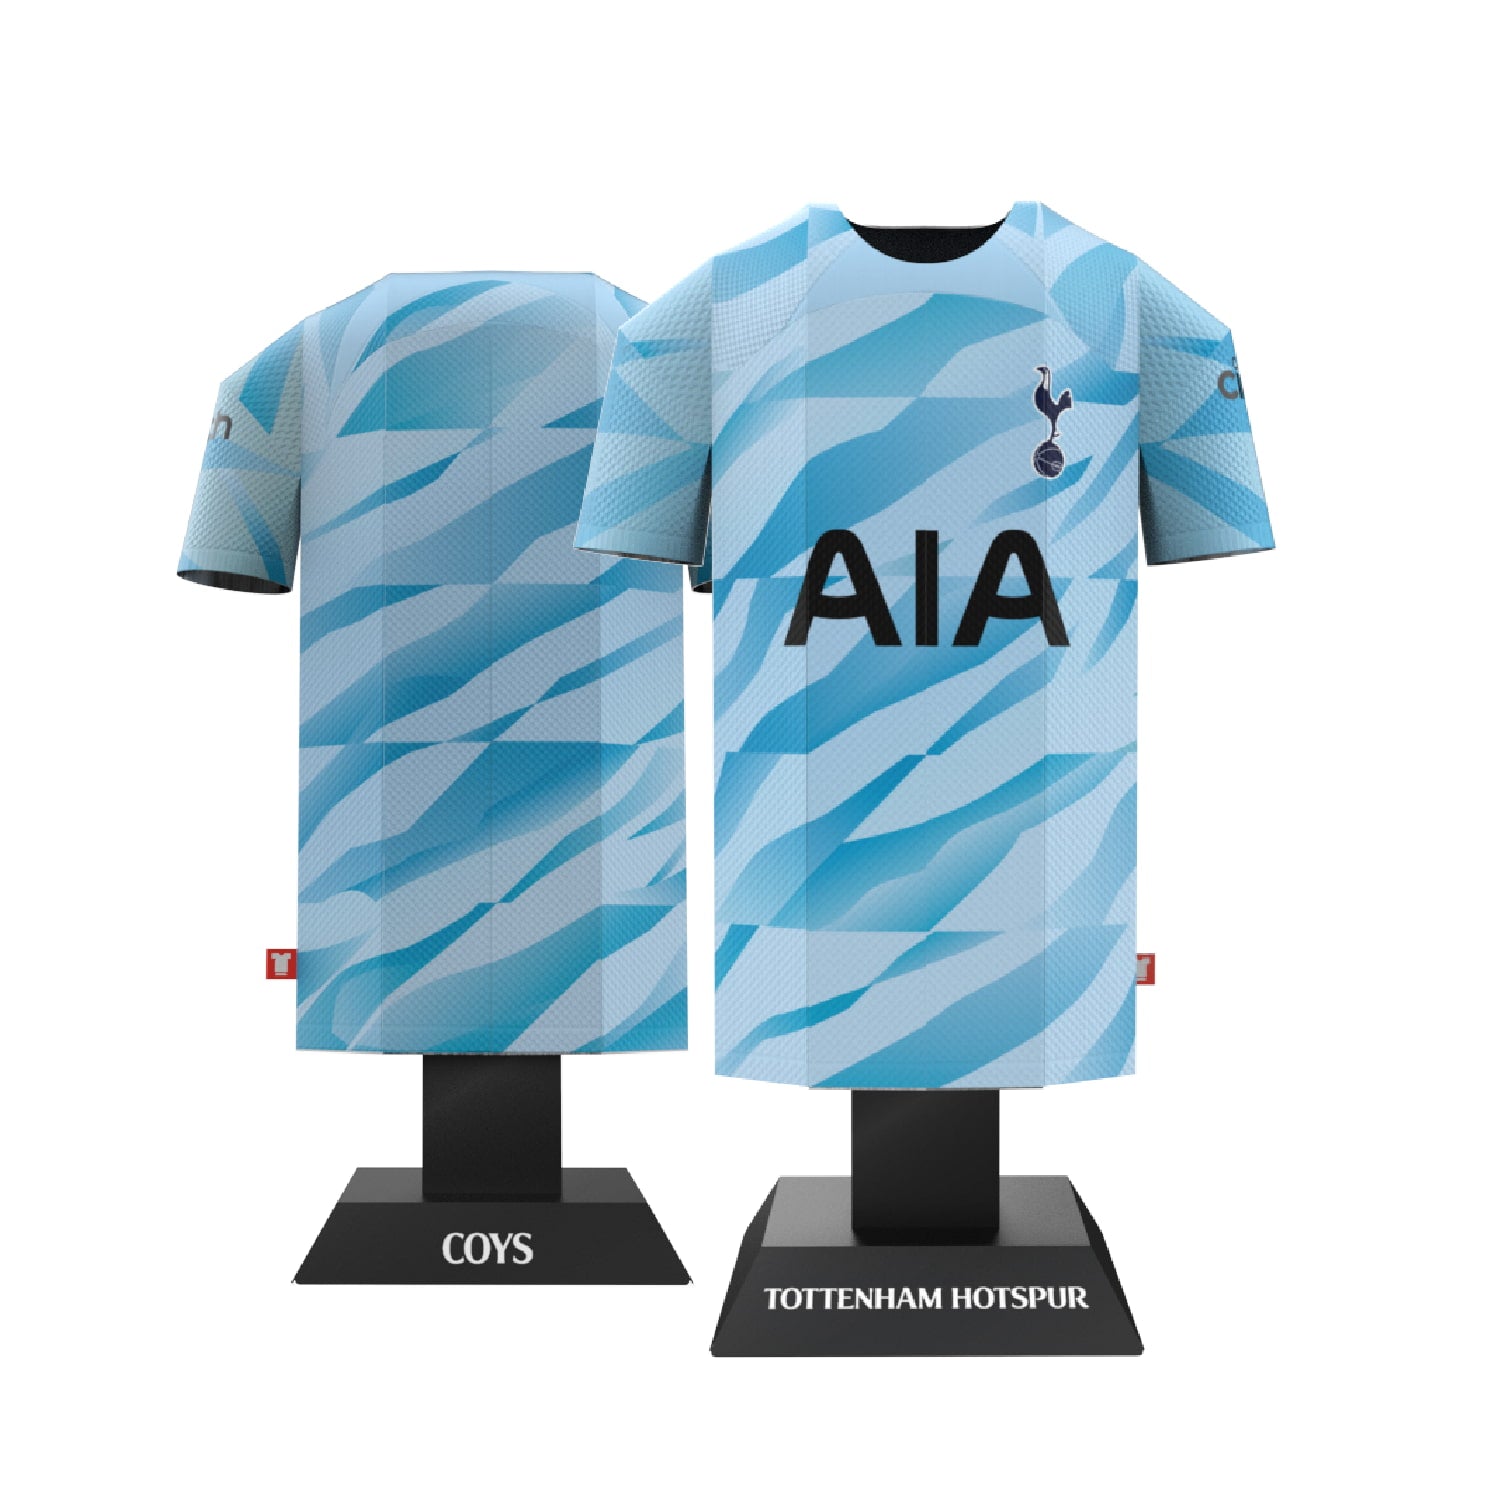 Tottenham goalkeeper shirt front and back view